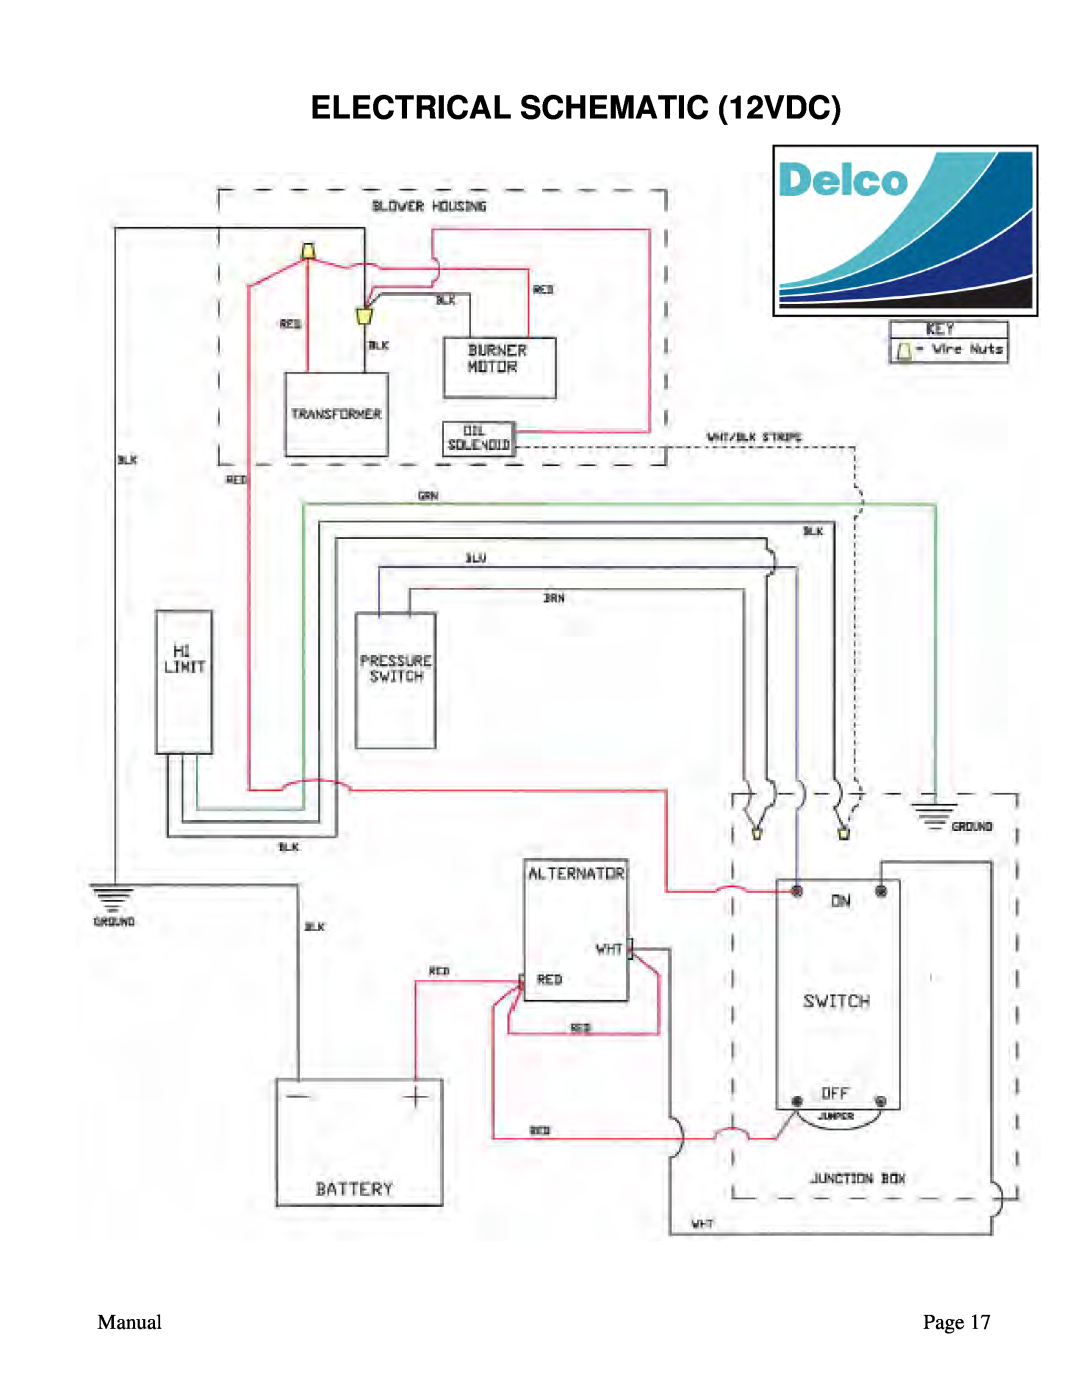 ACDelco PN 09301 A manual ELECTRICAL SCHEMATIC 12VDC, Manual, Page 